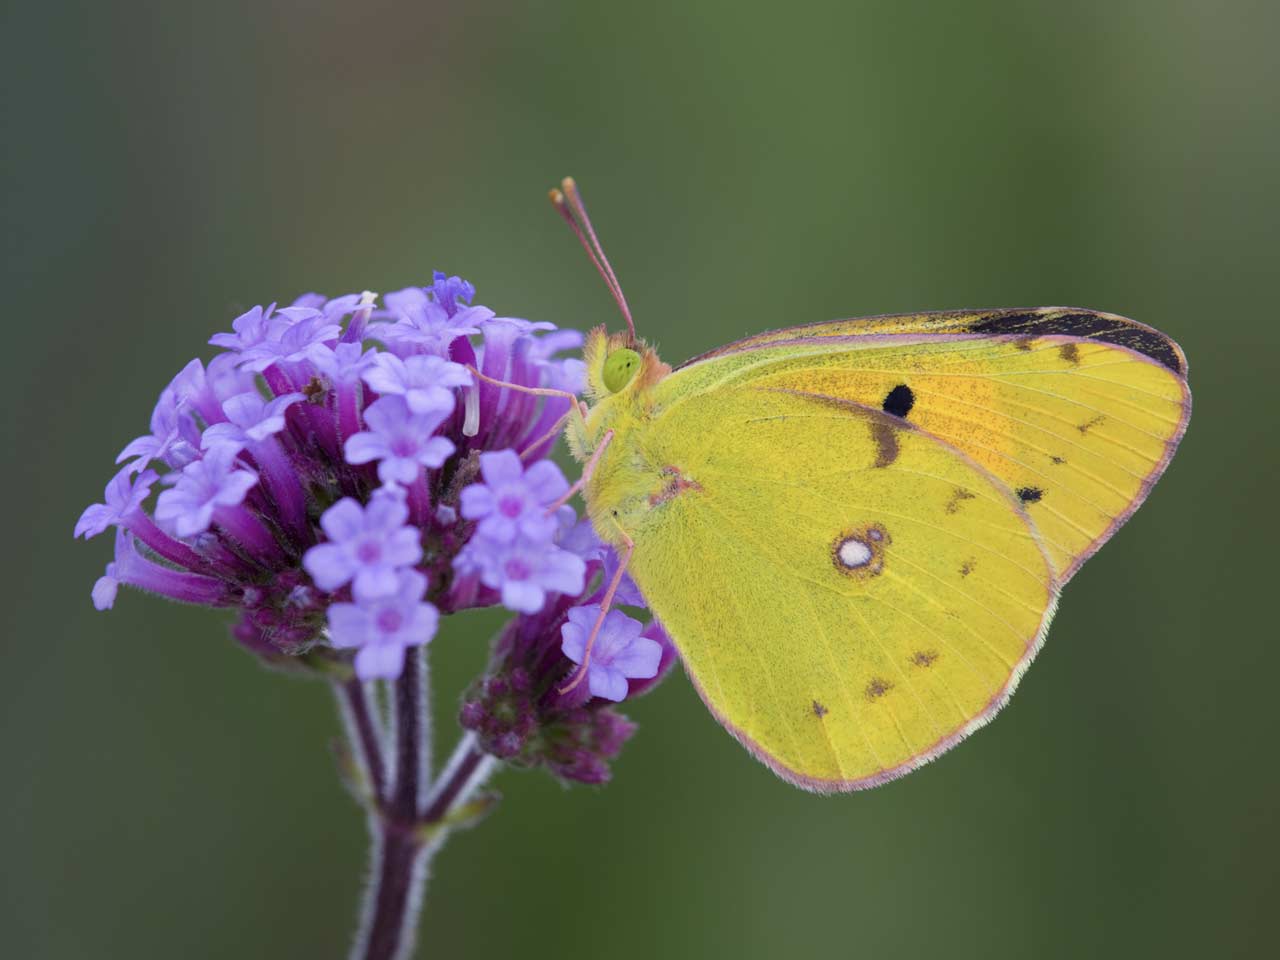 The clouded yellow butterfly: location & migratory 